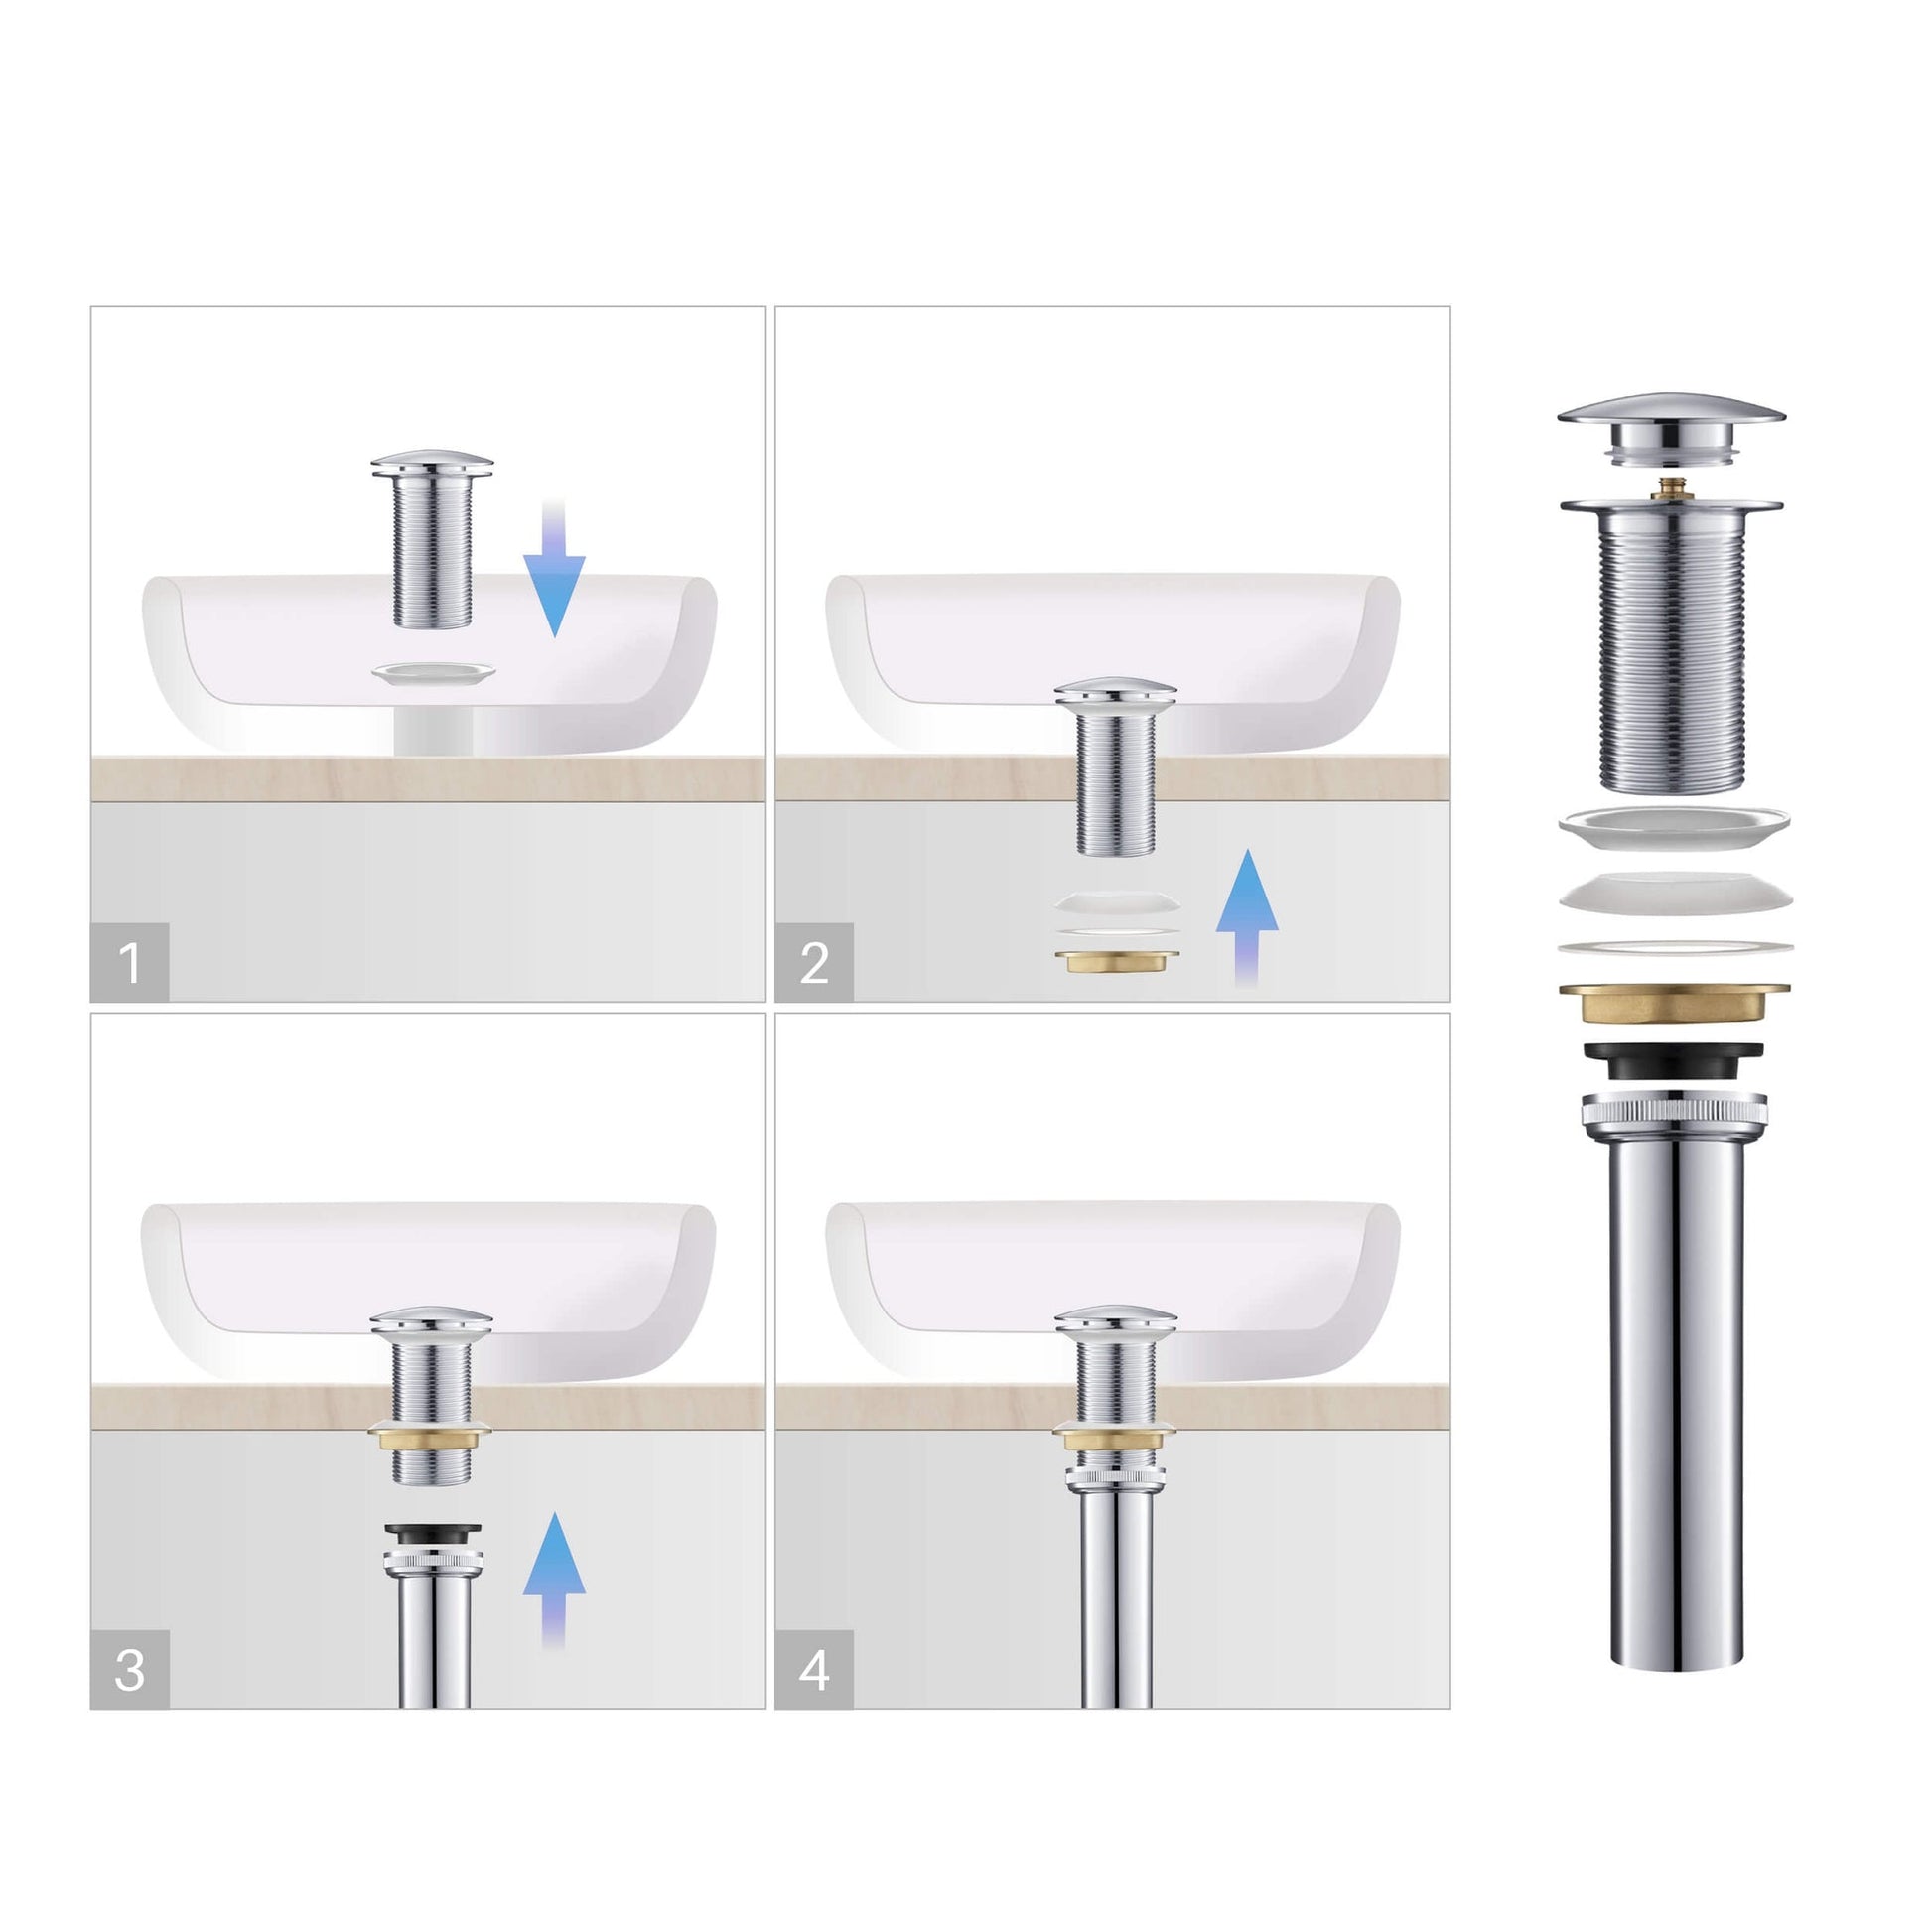 KIBI Brass Bathroom Vessel Sink Pop-Up Drain Stopper Full Cover Without Overflow in Chrome Finish